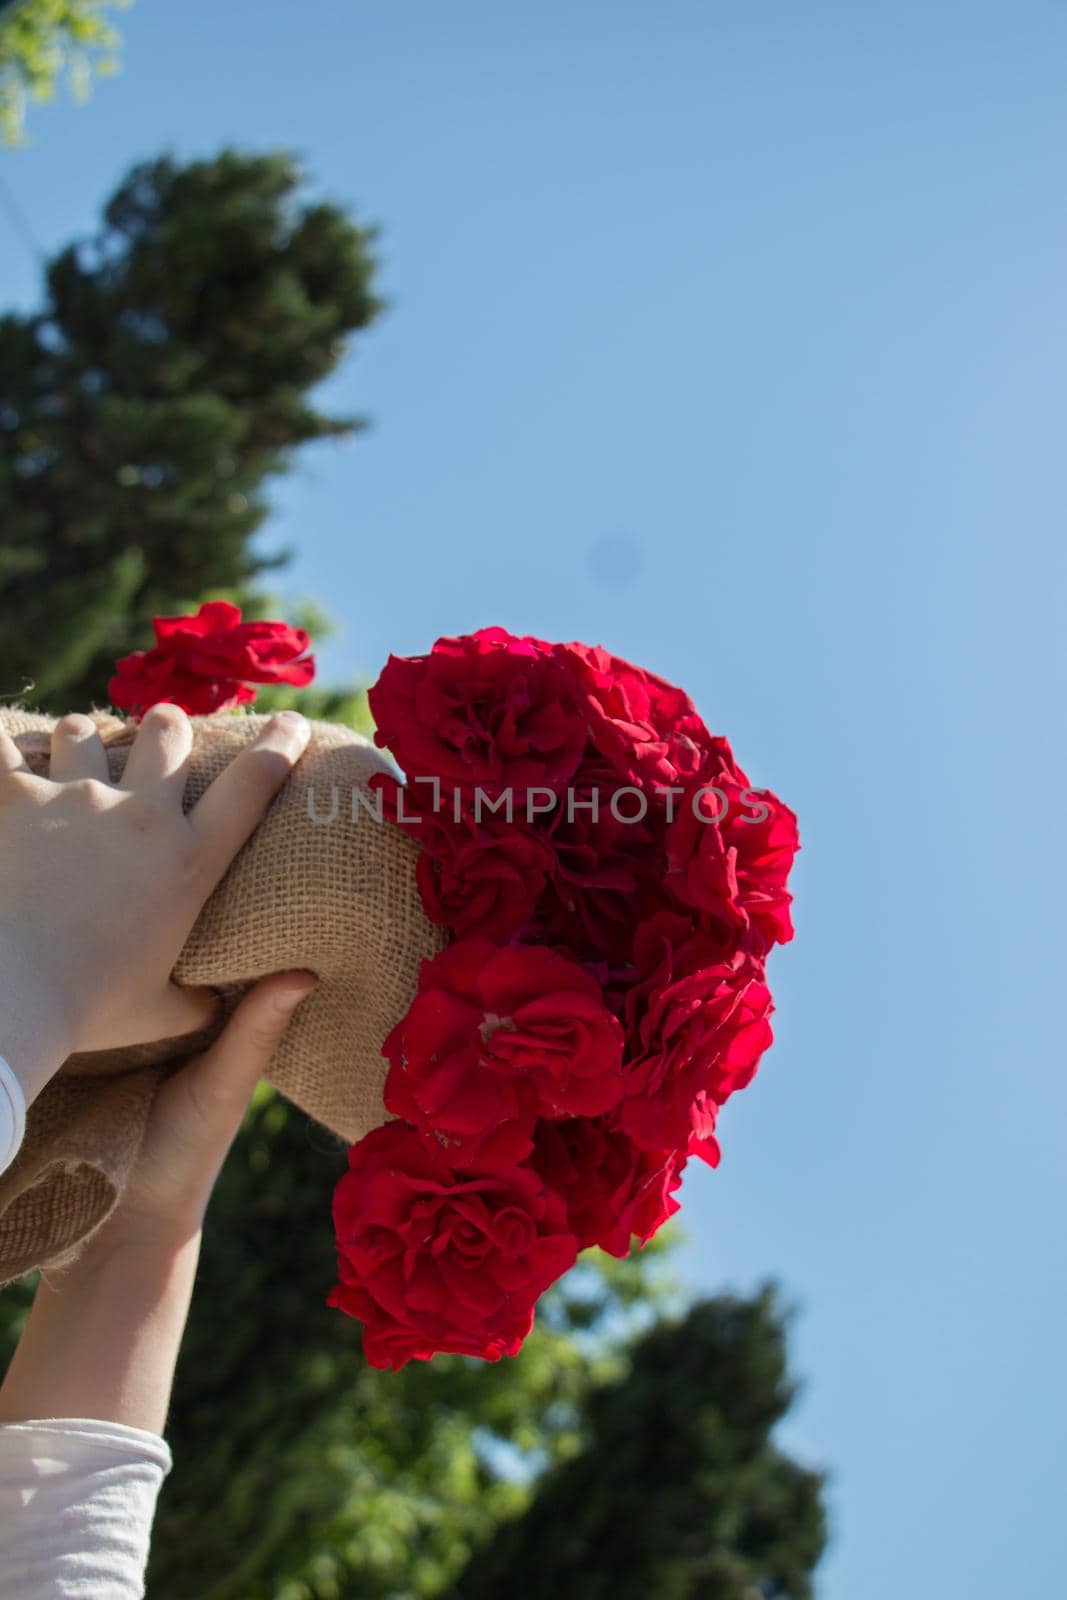 Beautiful fresh roses wrapped with canvas in hand